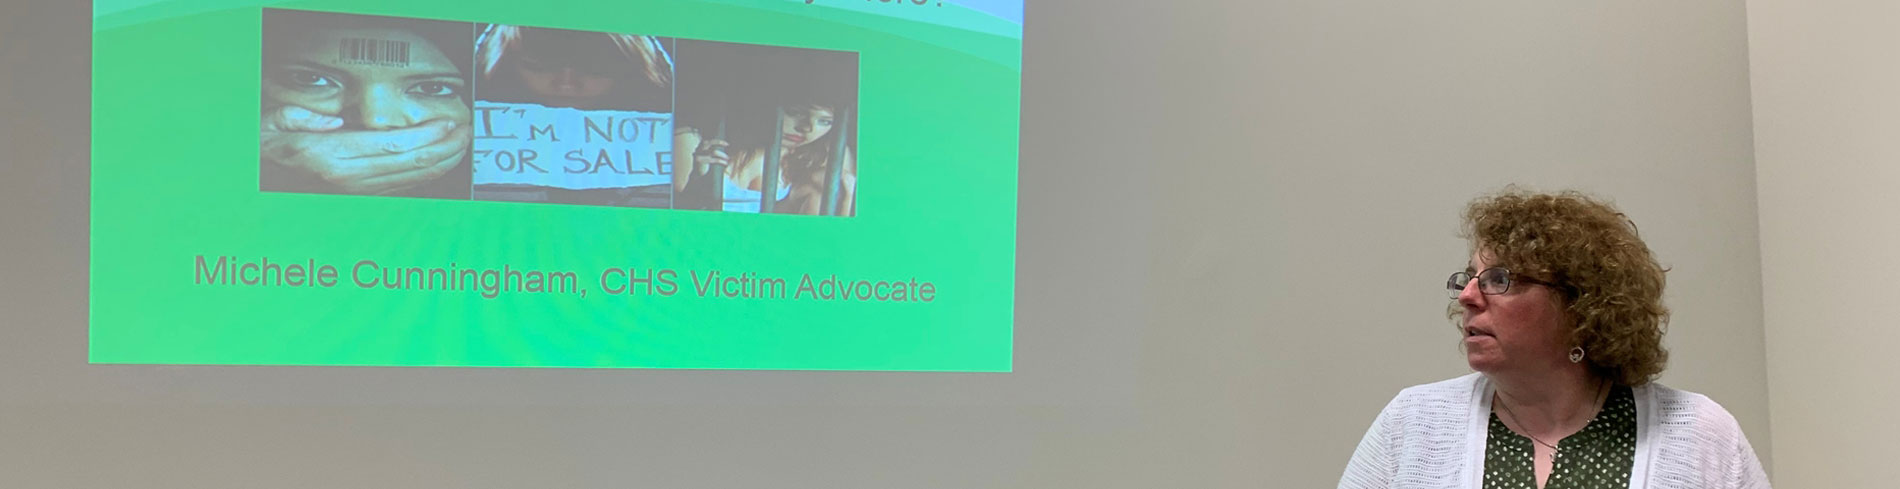 A Chicago Hearing Society employee presenting on being a victim advocate.